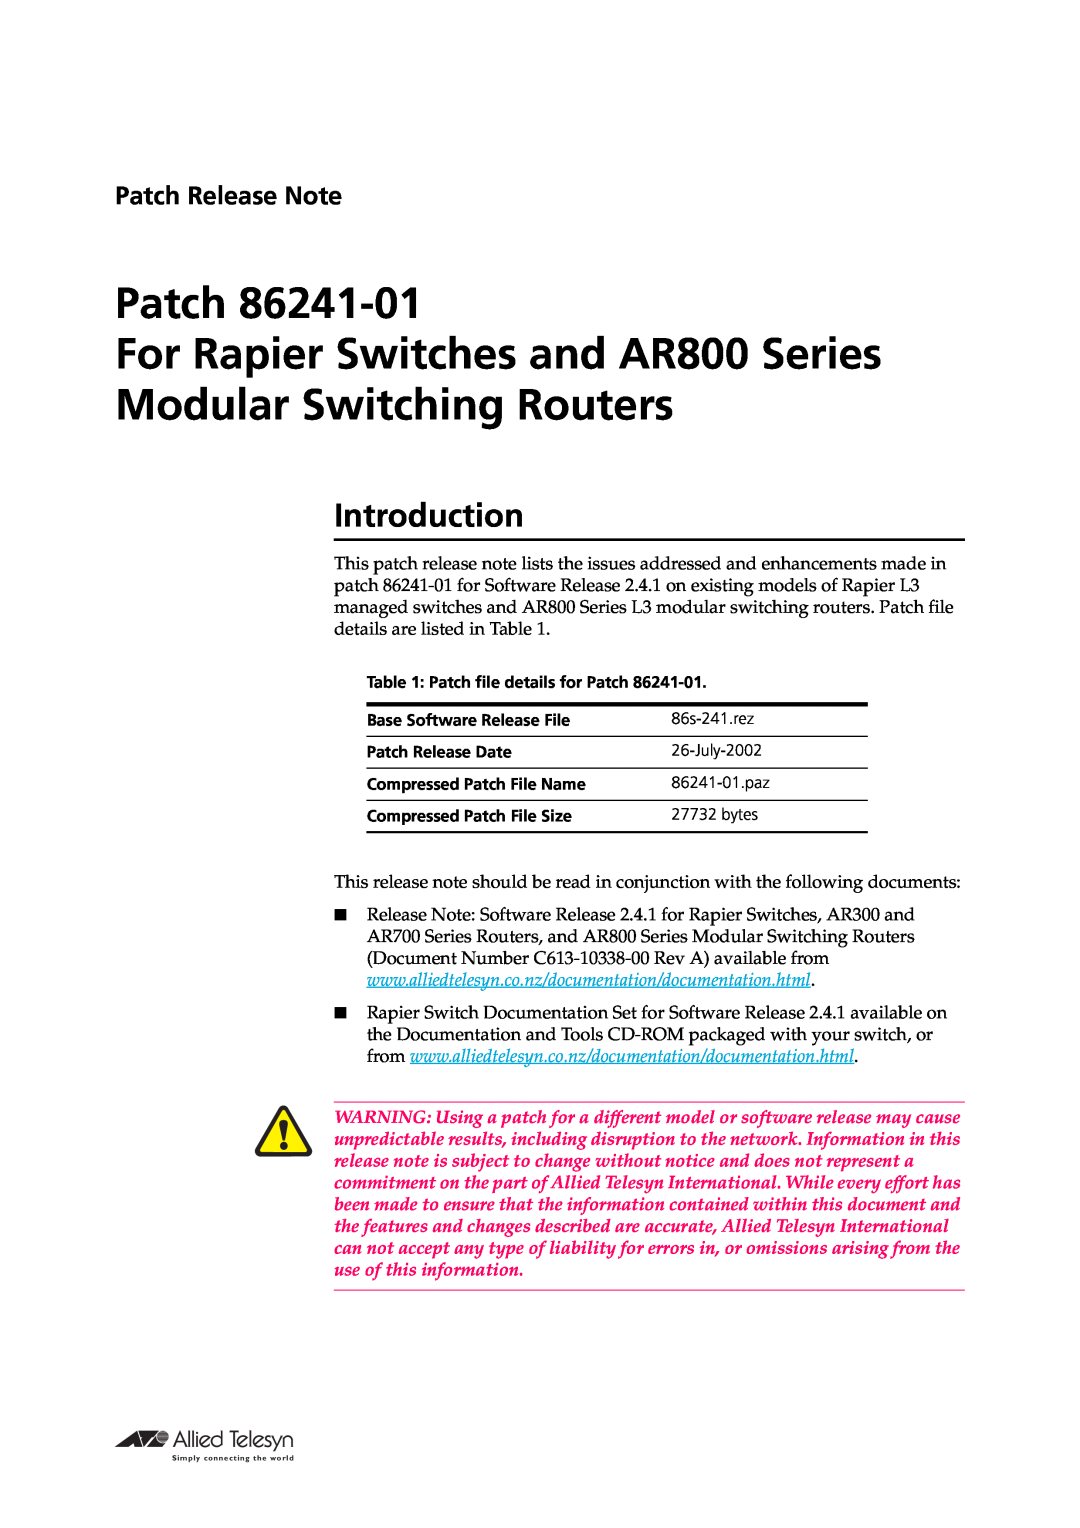 Allied Telesis 86241-01 manual Introduction, Patch For Rapier Switches and AR800 Series Modular Switching Routers 